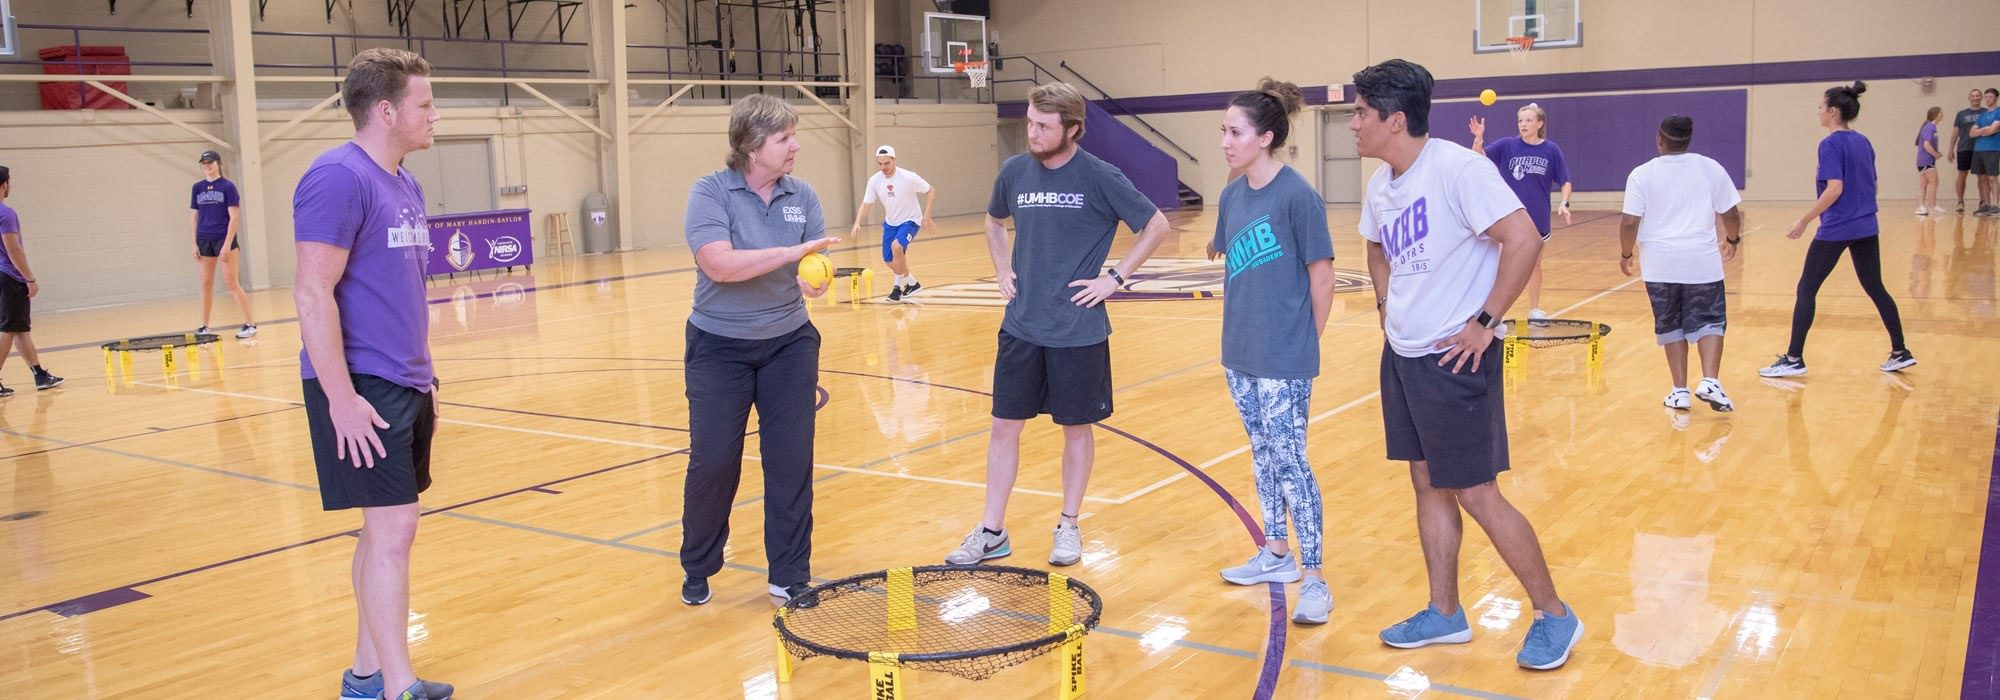 Degree in physical education students learning the art of coaching from pe teacher program professor at UMHB.